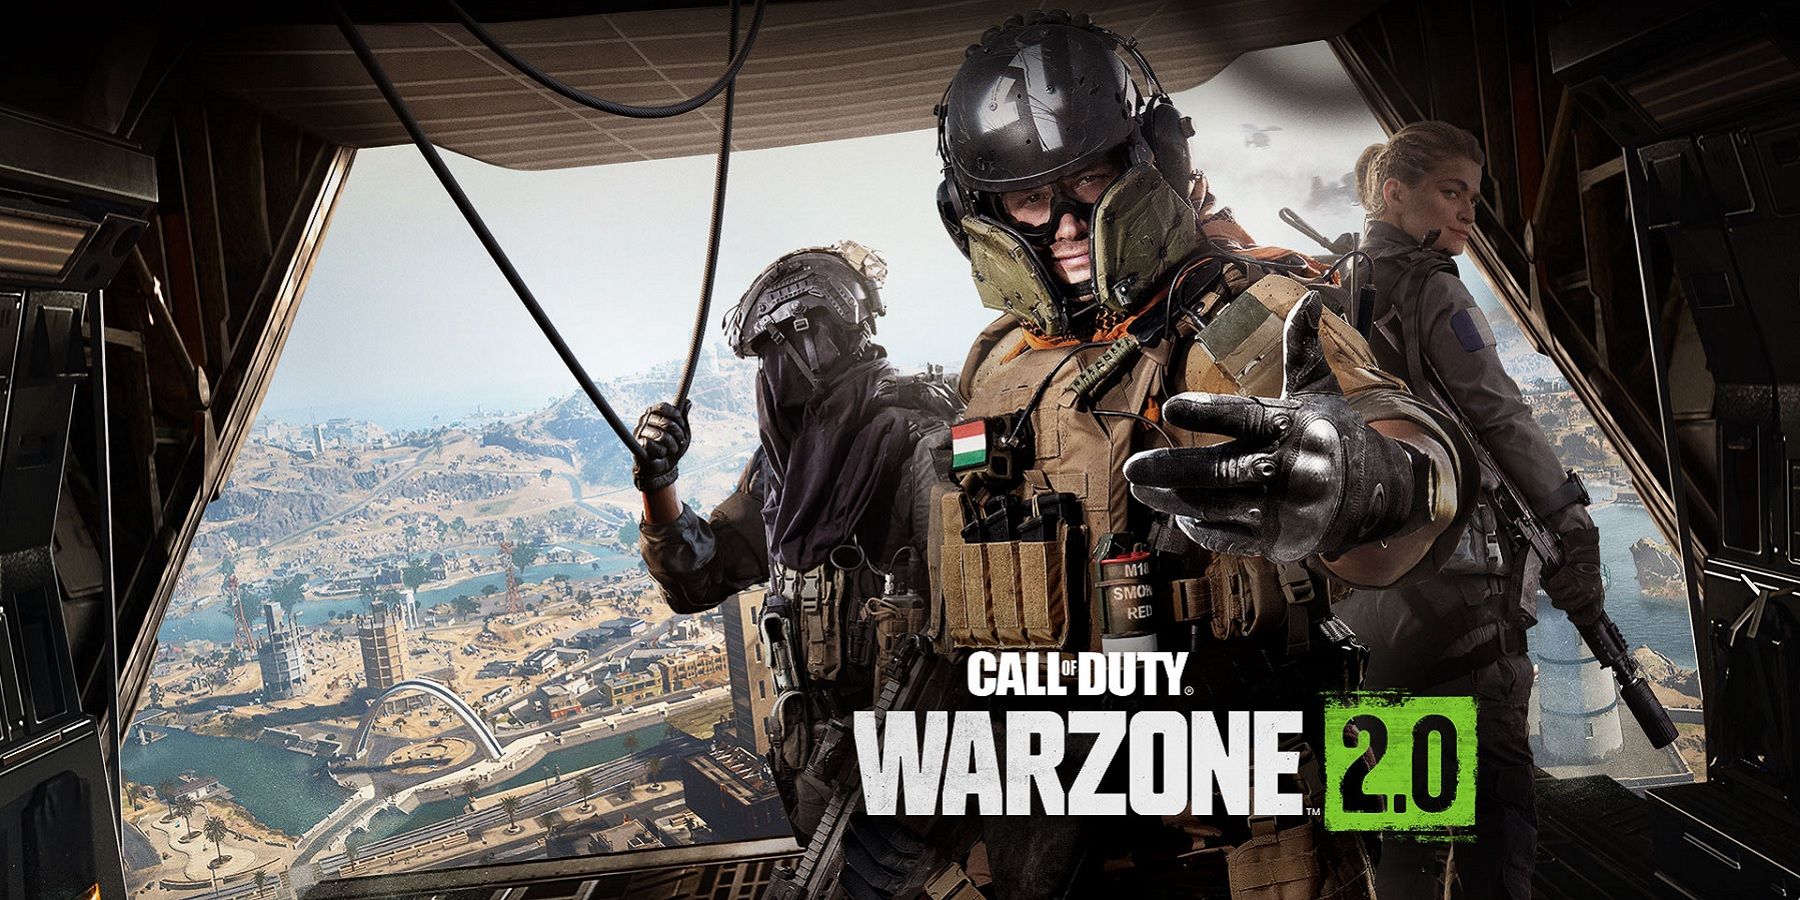 Call of Duty: Warzone 2 is Dropping the Ball With Combat Records